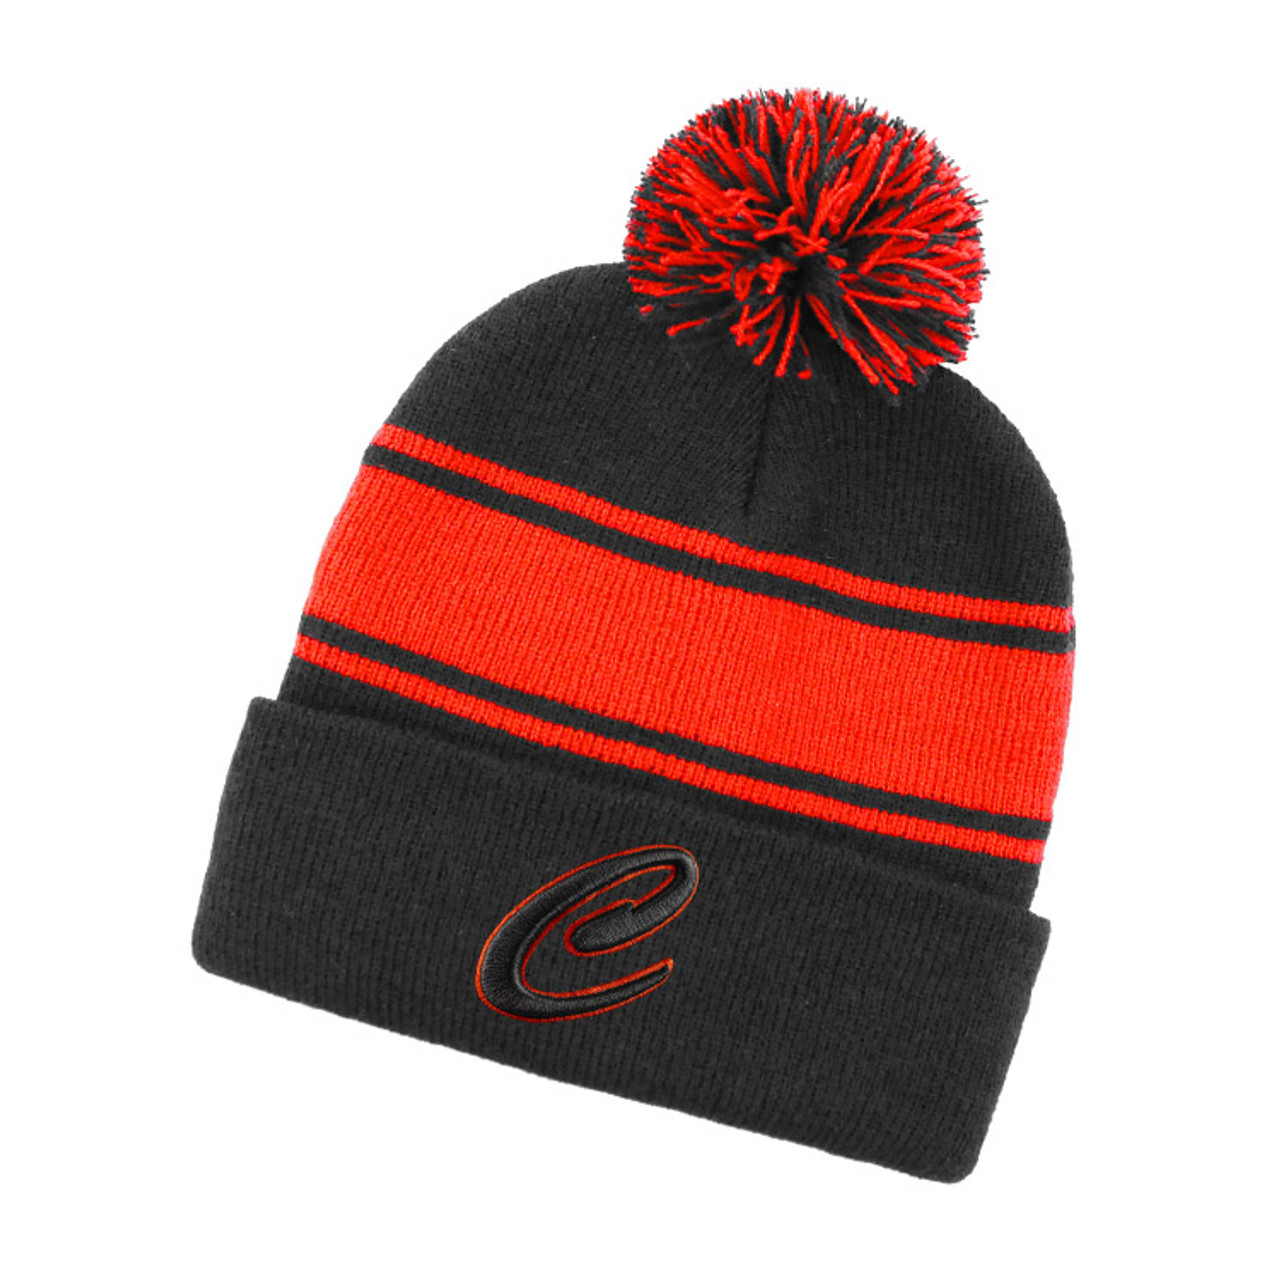 AH735 Beanie - Grace Collection - Headwear, Bags and Clothing.